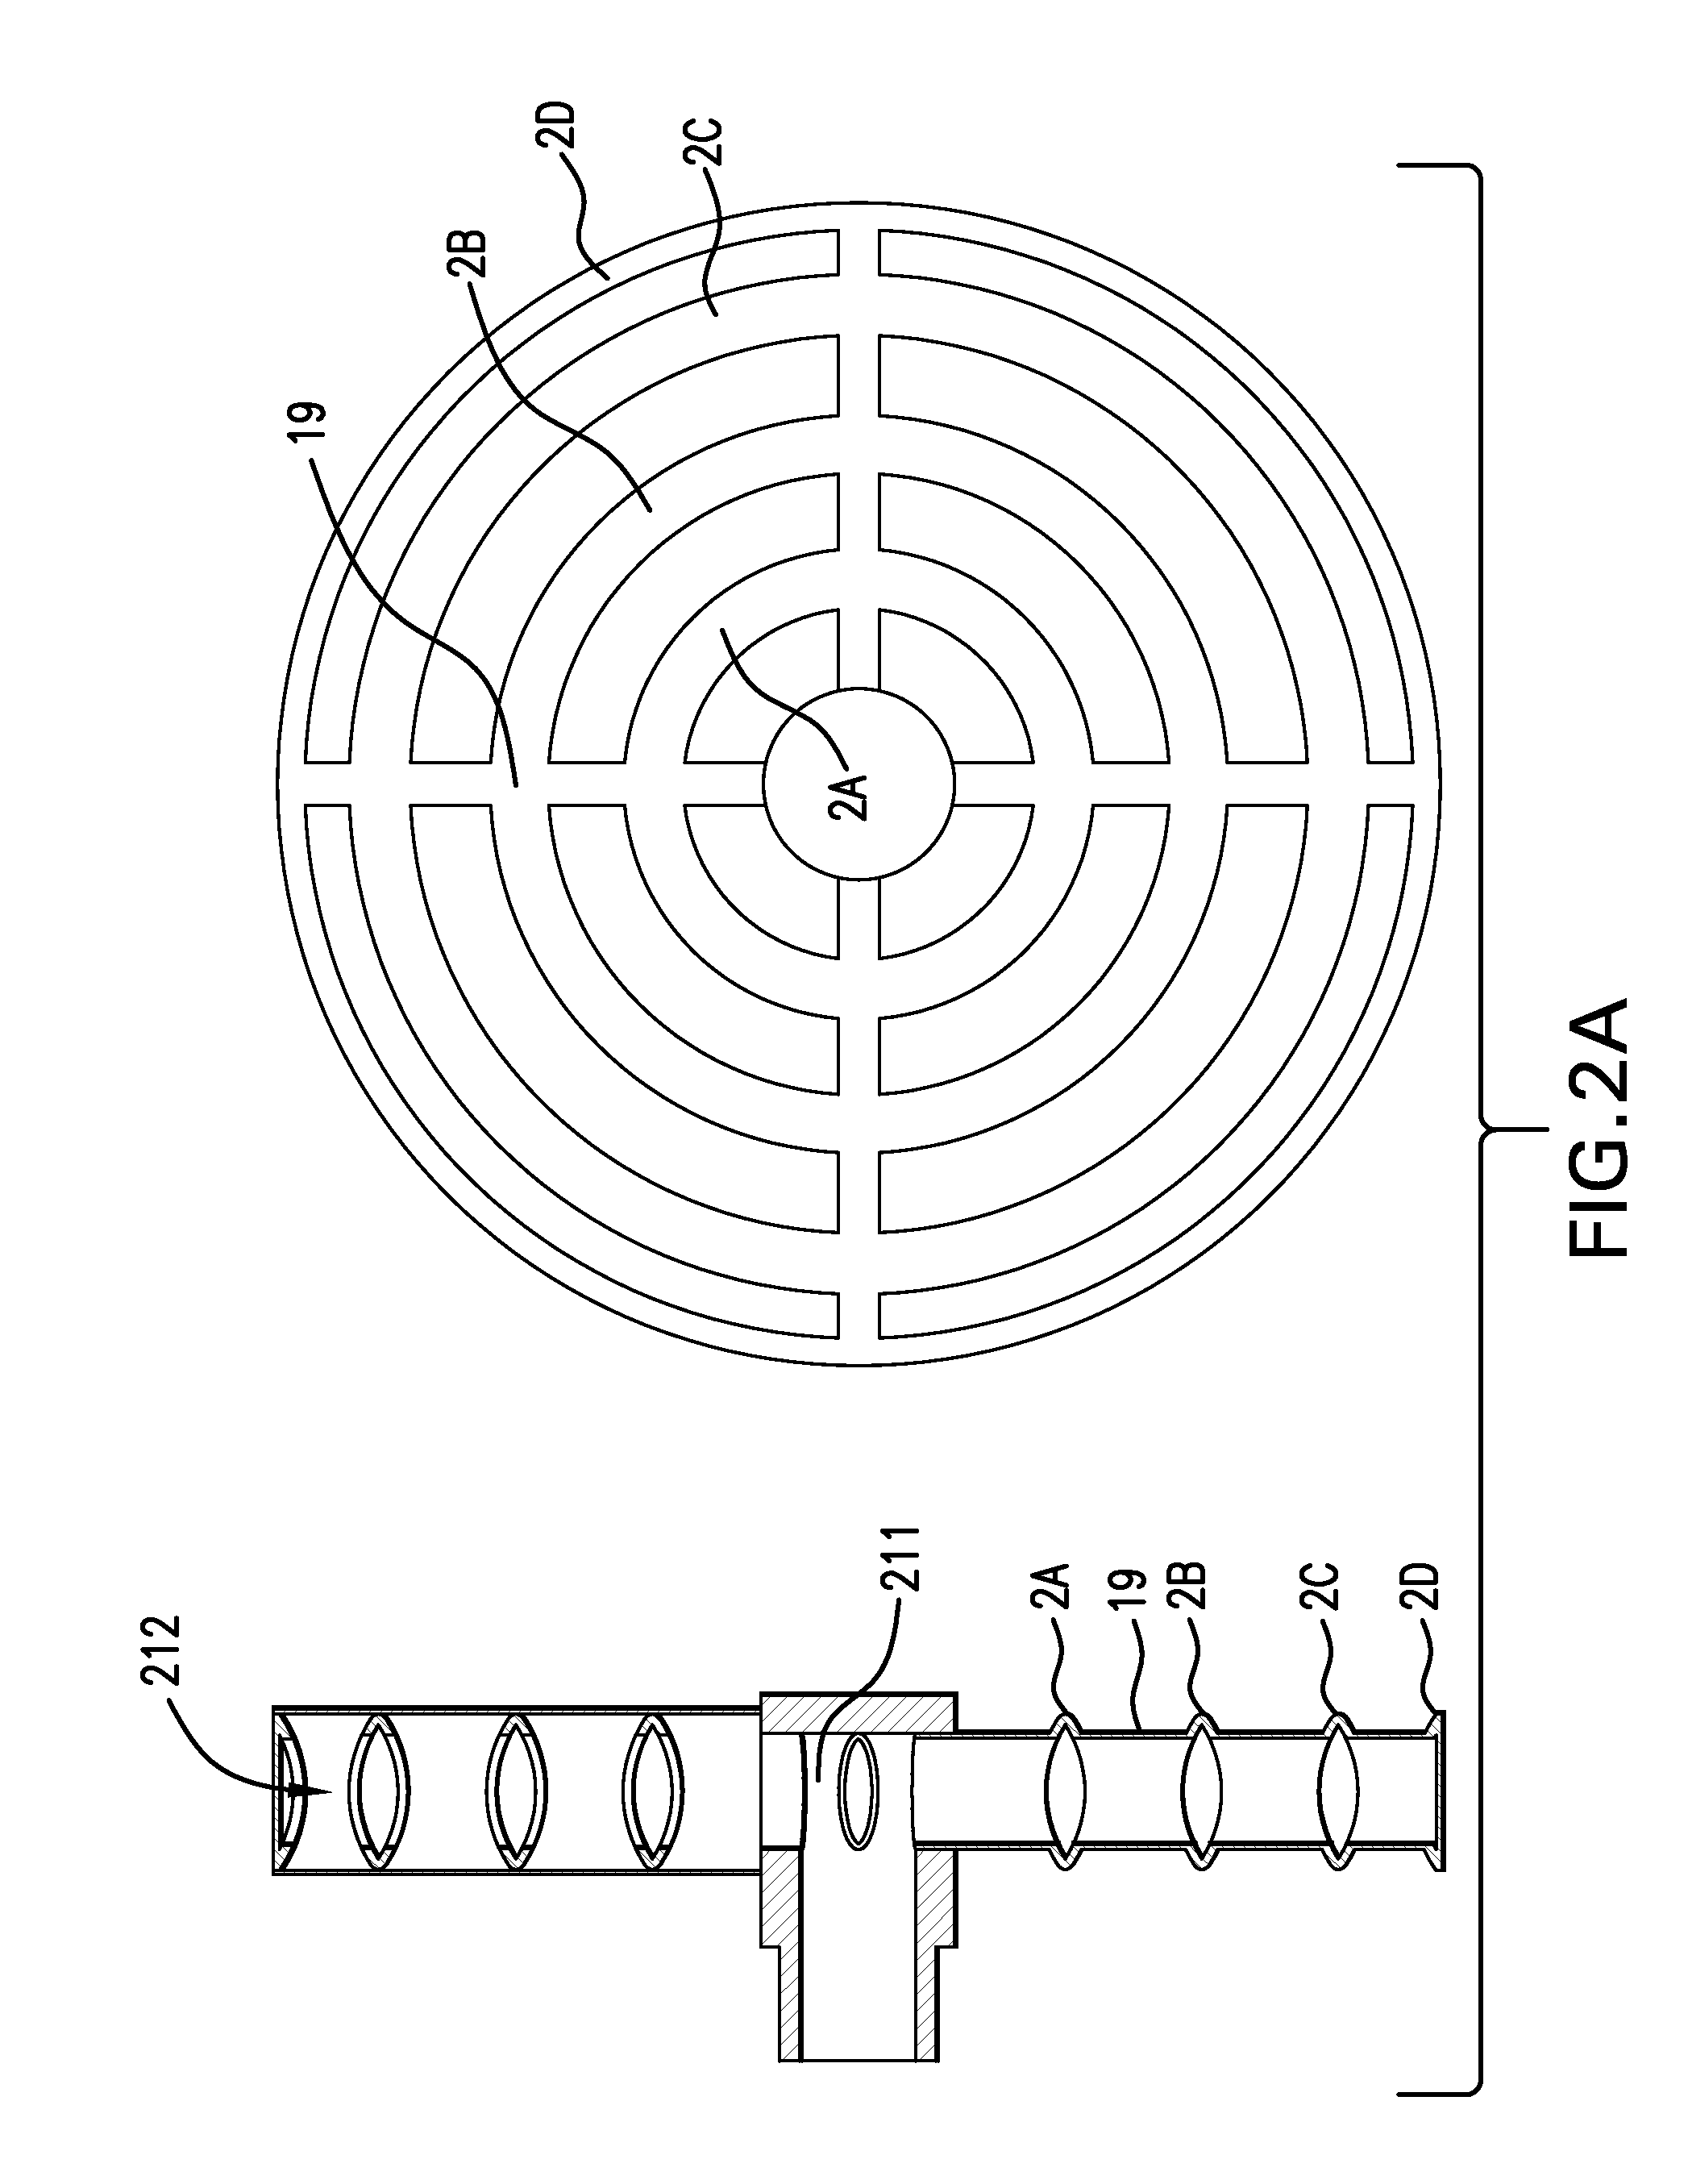 Combustion cavity layouts for fuel staging in trapped vortex combustors